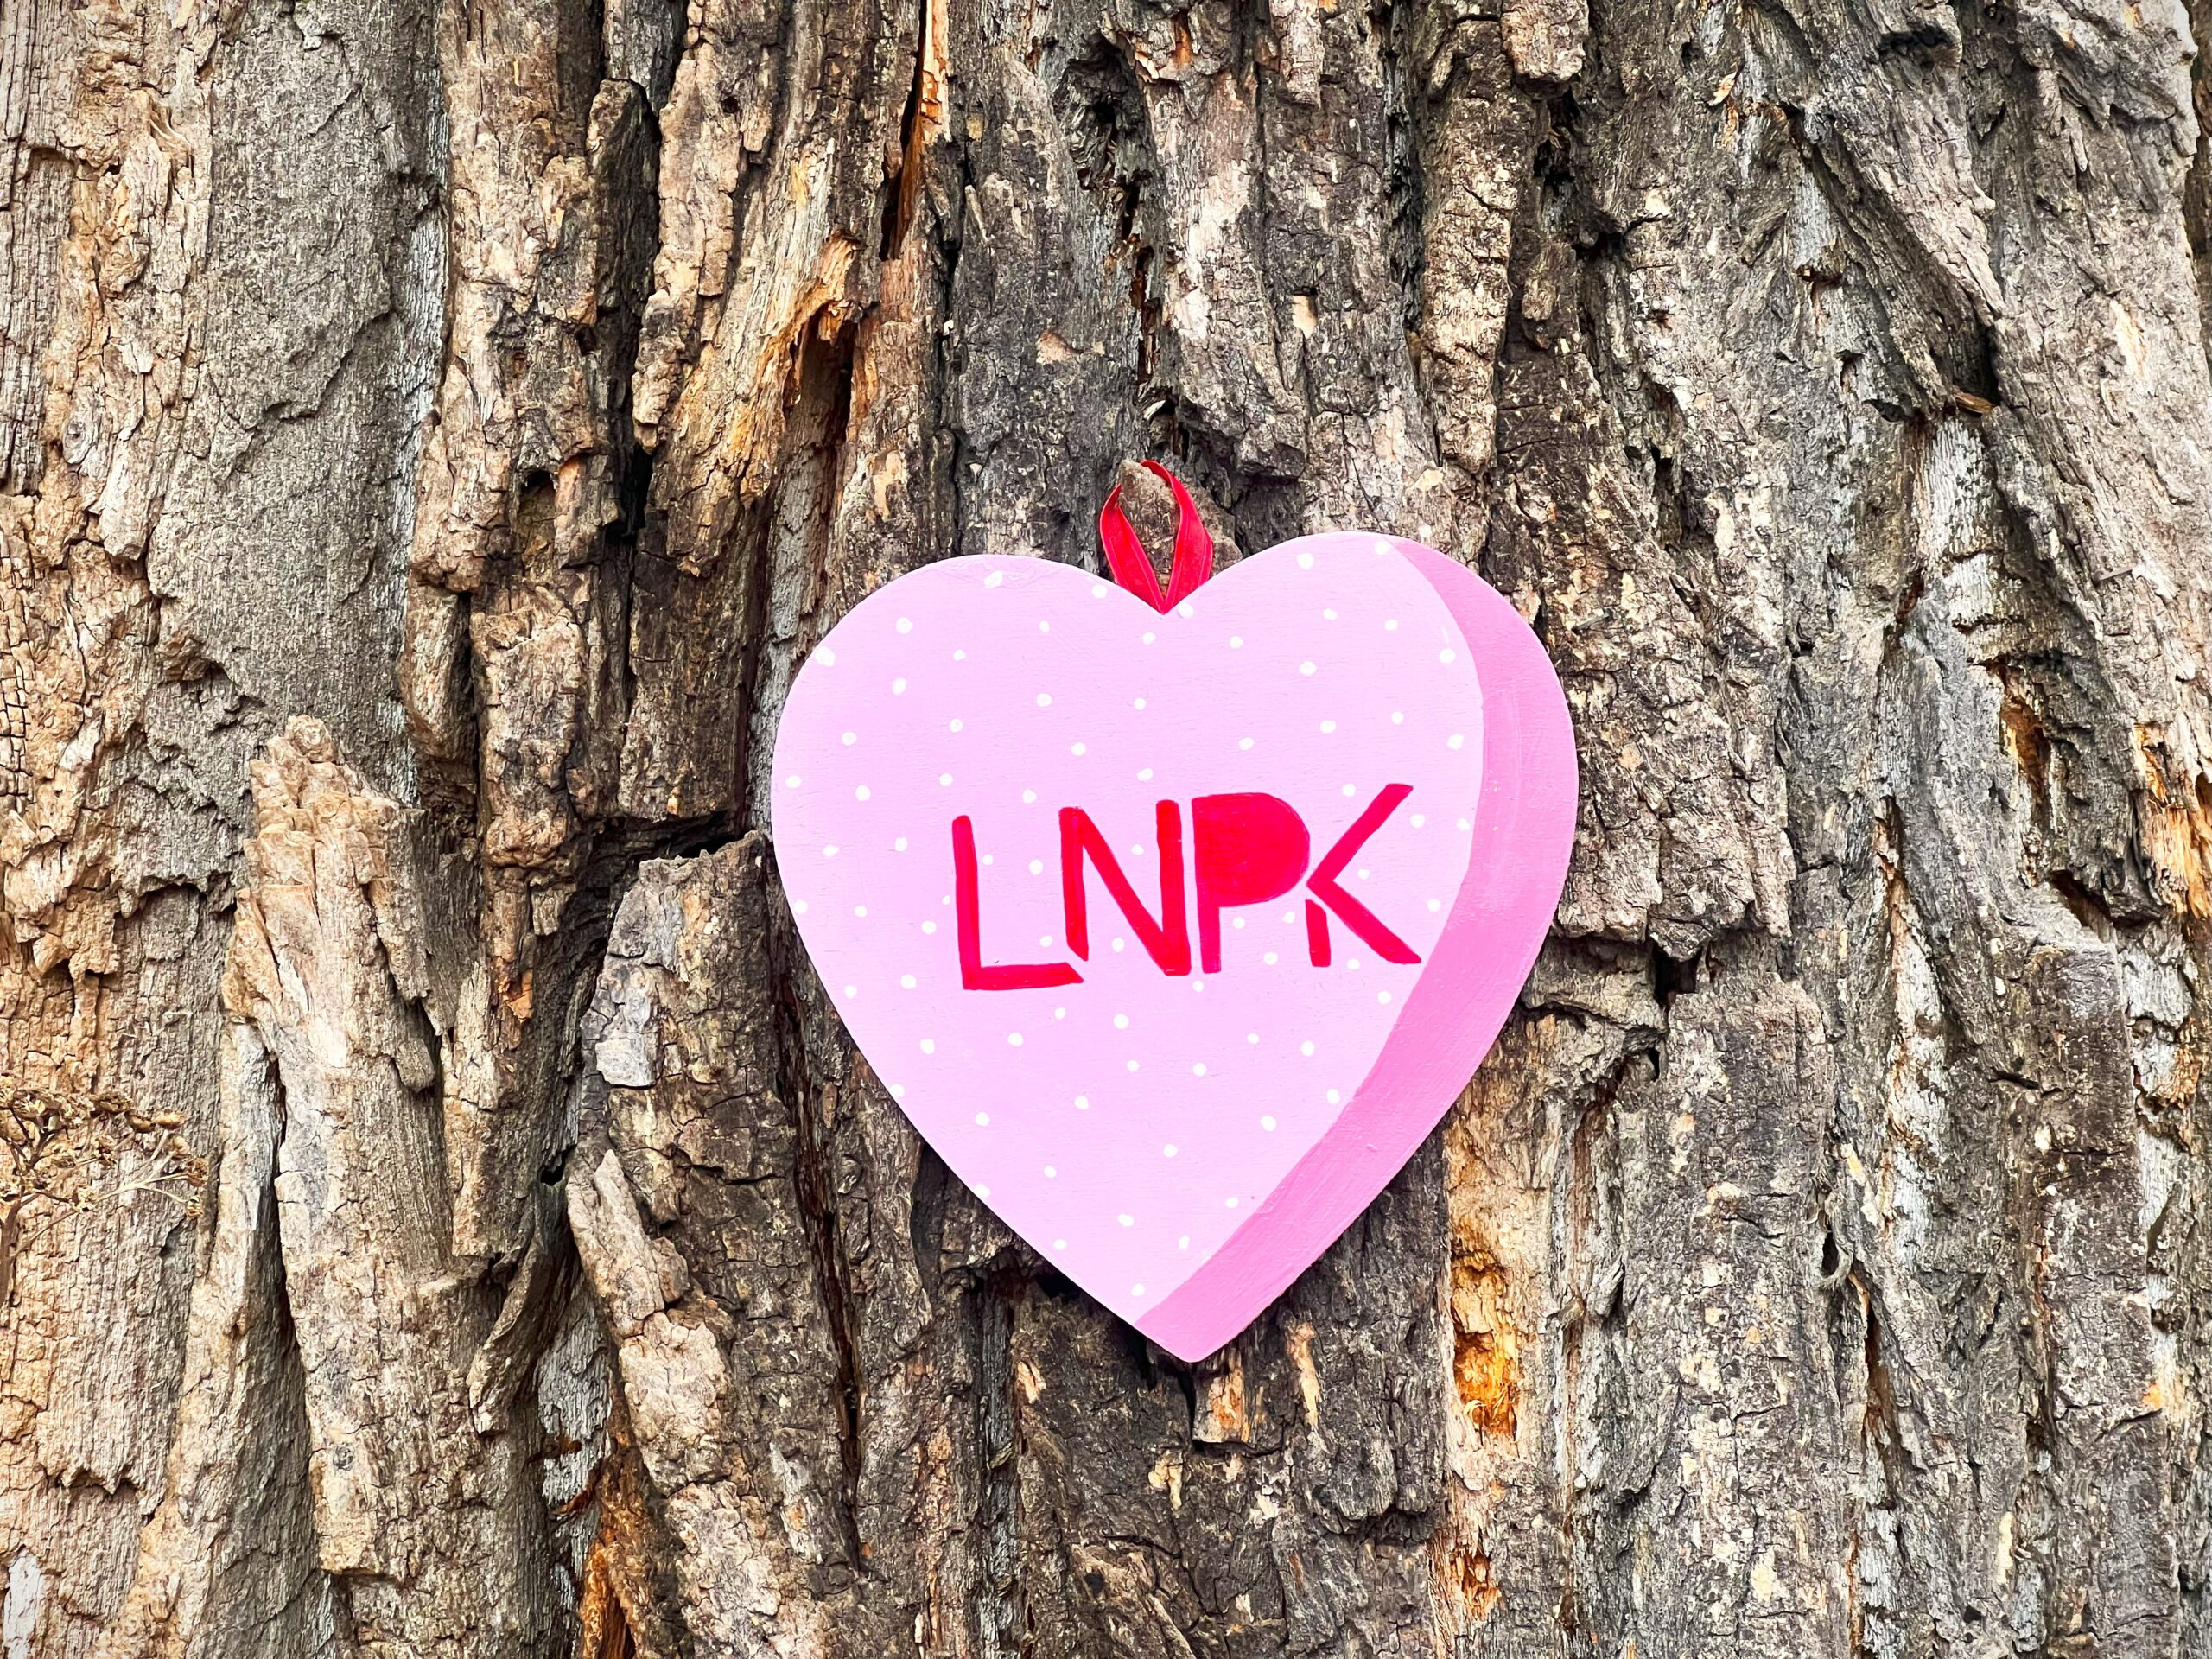 Pink heart with polka dots and "LNPK" in red hangs on a large tree with textured bark.